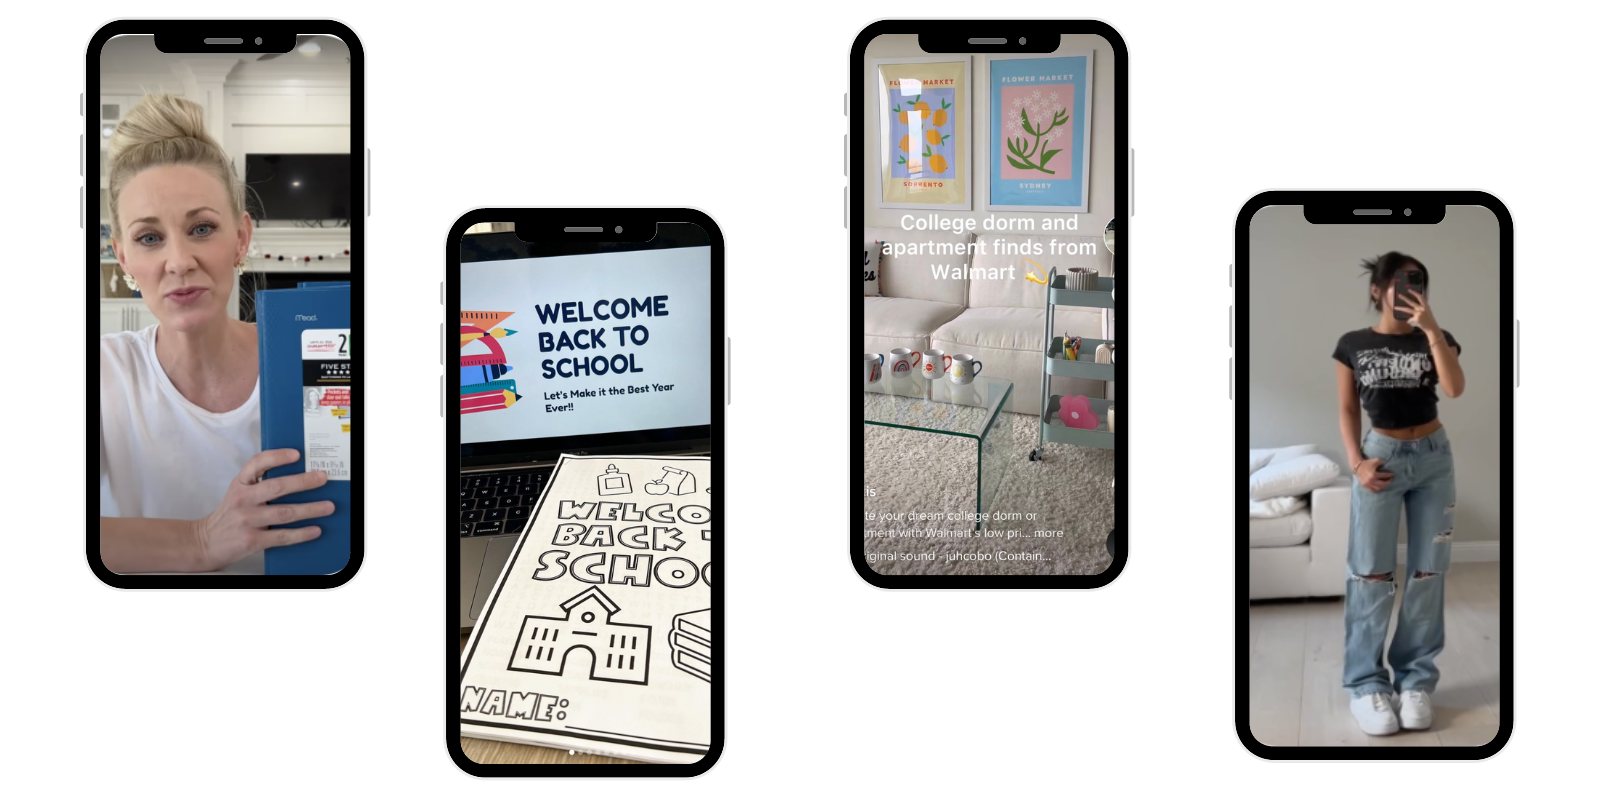 Collage of phone images with back to school influencer contant